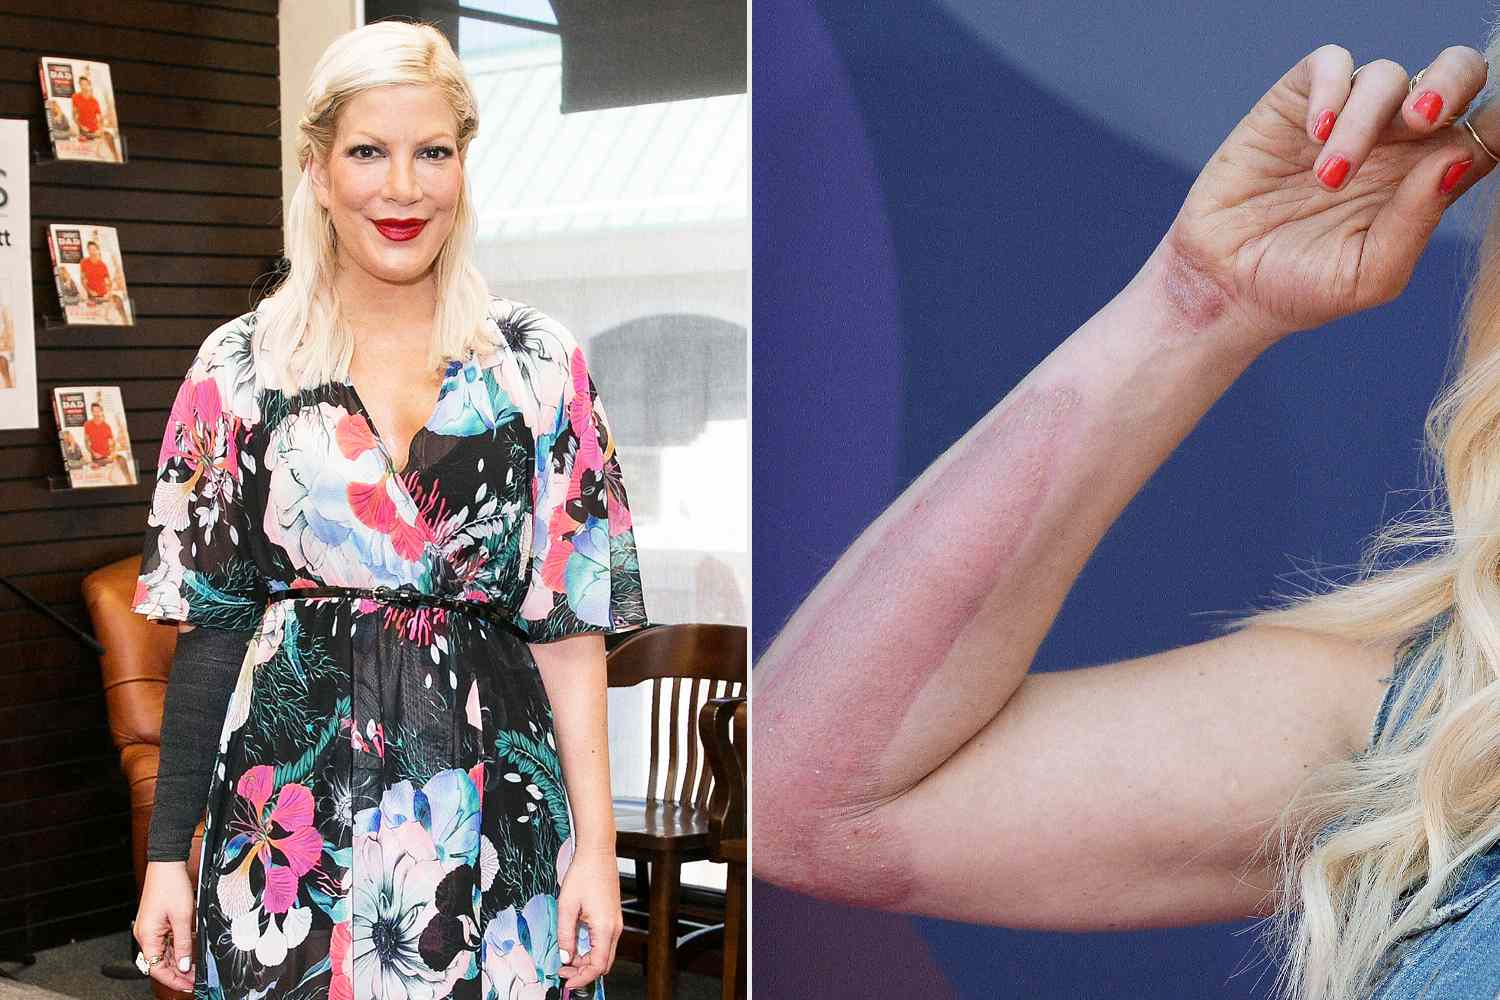 Tori Spelling Says She's 'Wearing My Thigh on My Arm' from Skin Graft After Falling on a Hot Hibachi Grill